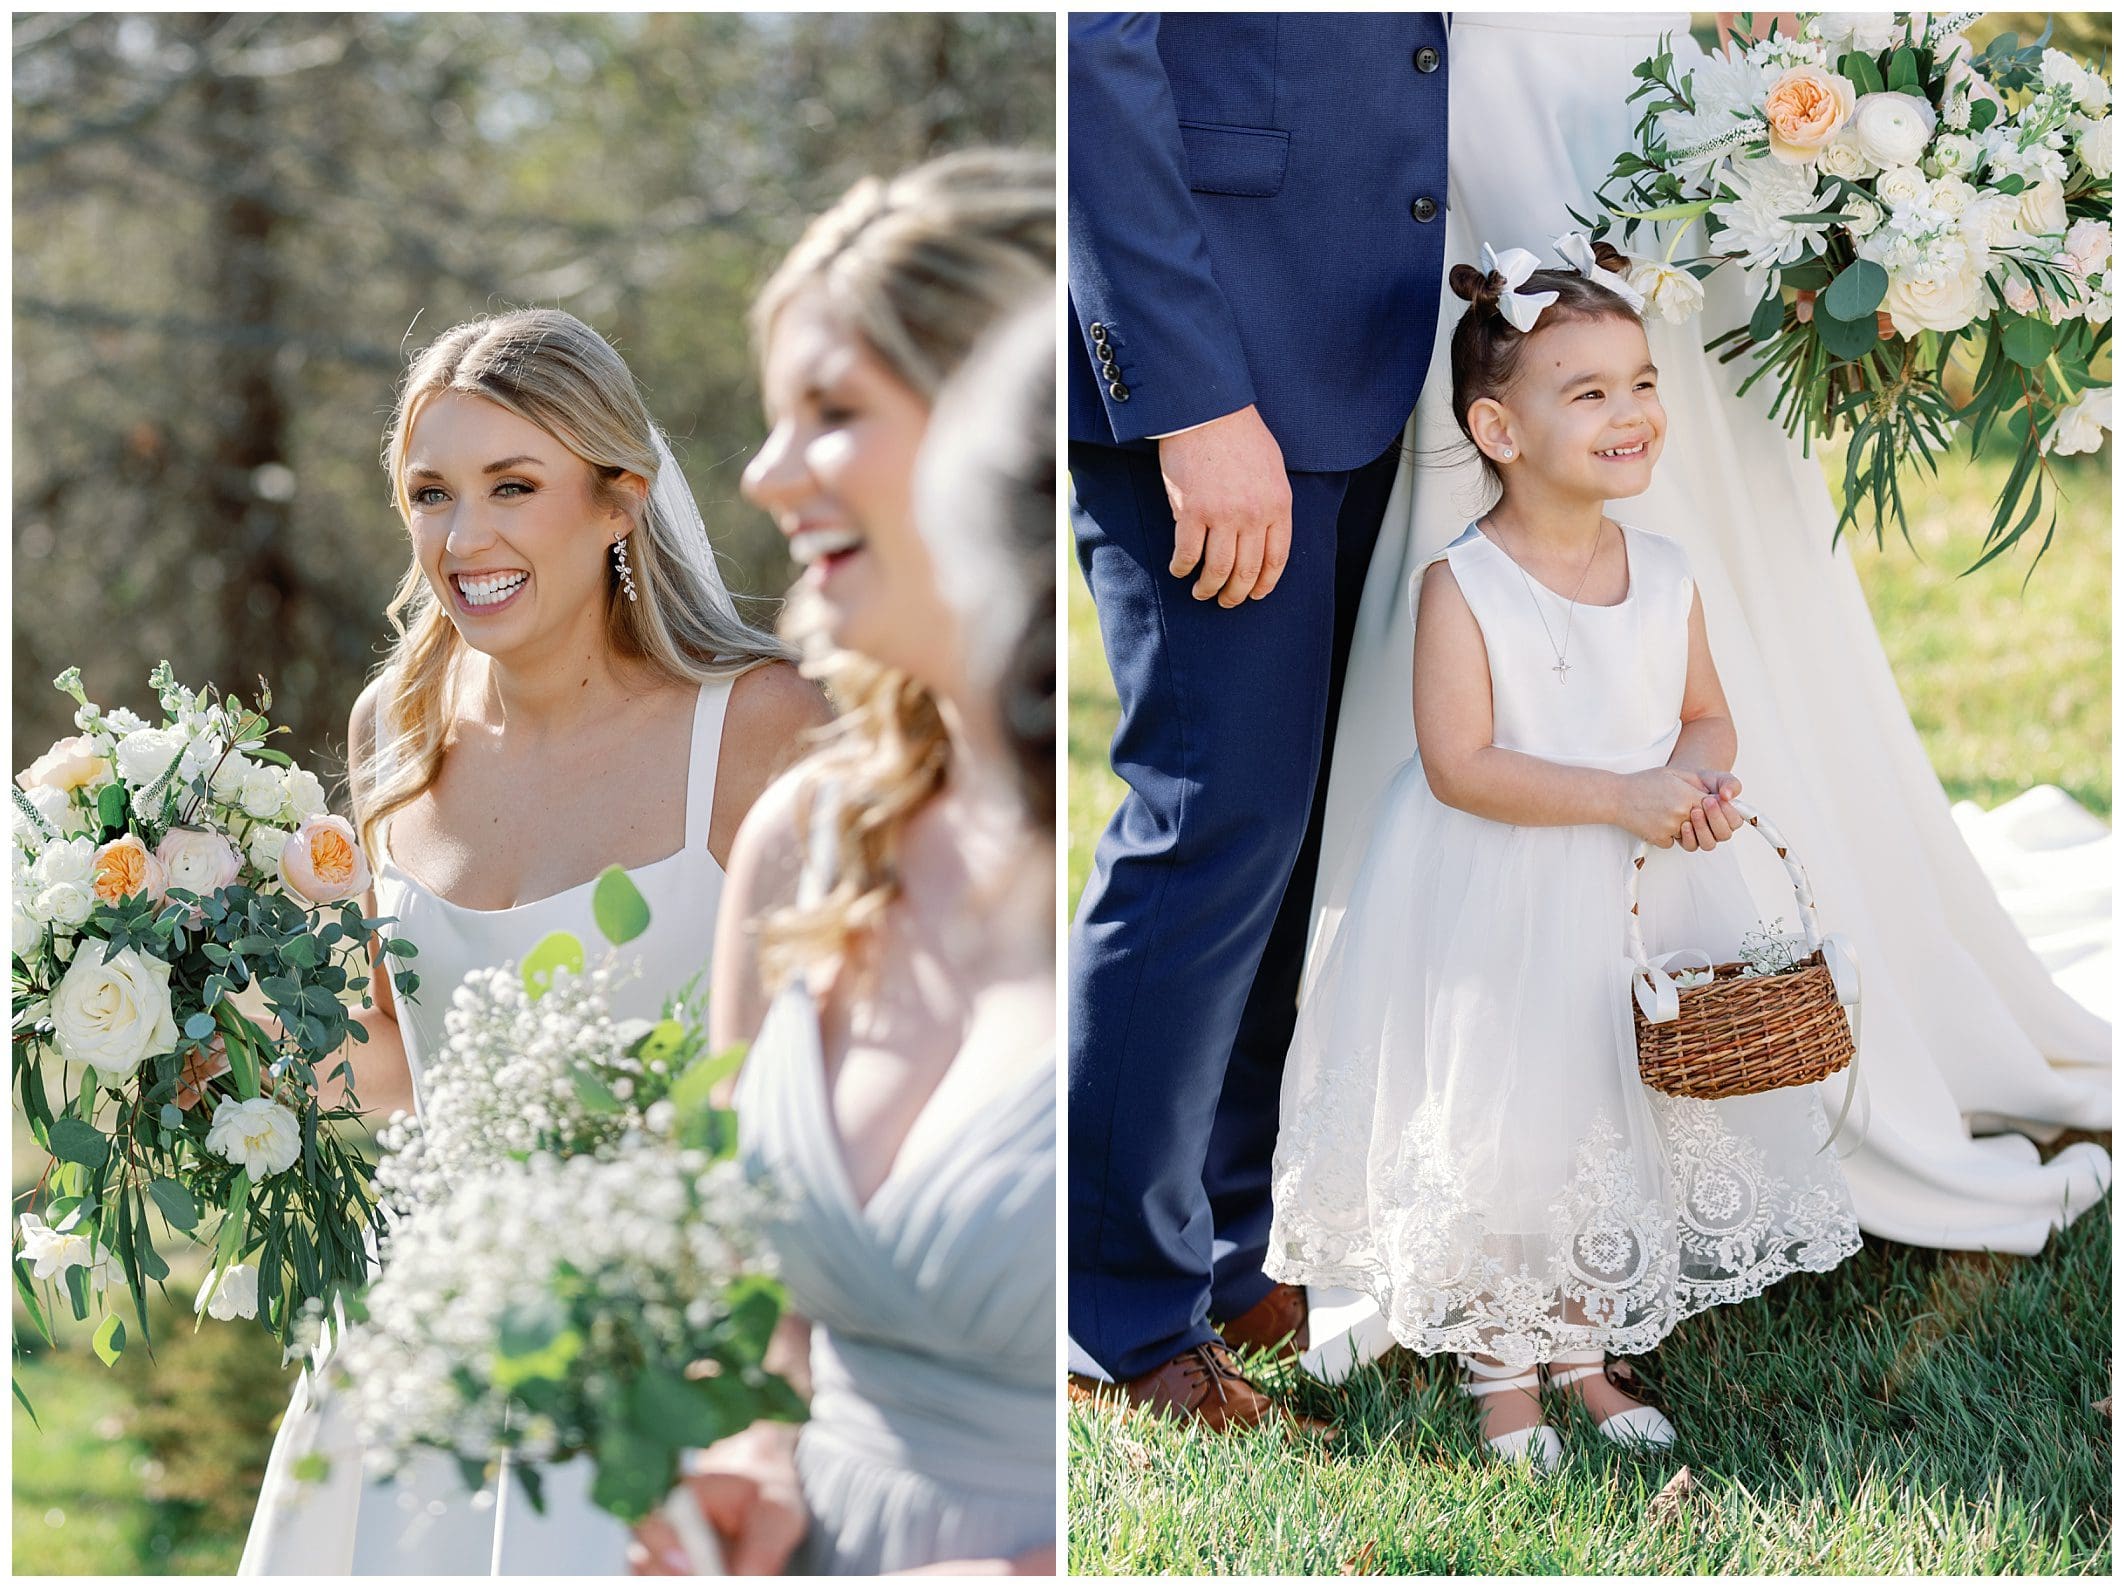 A bride and groom with a flower girl at their wedding.